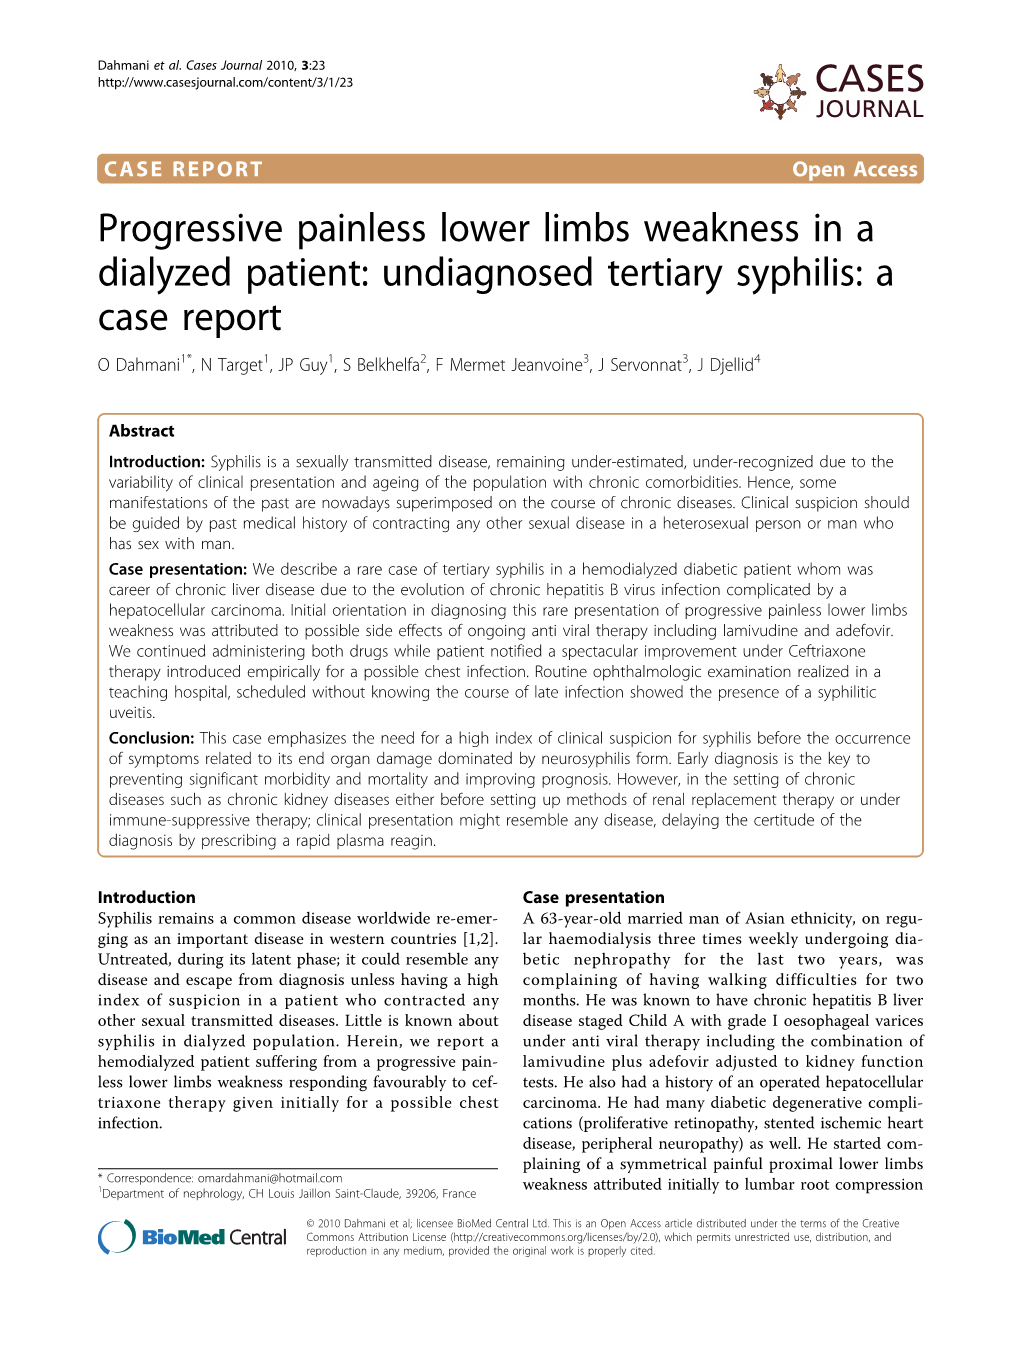 Progressive Painless Lower Limbs Weakness in a Dialyzed Patient